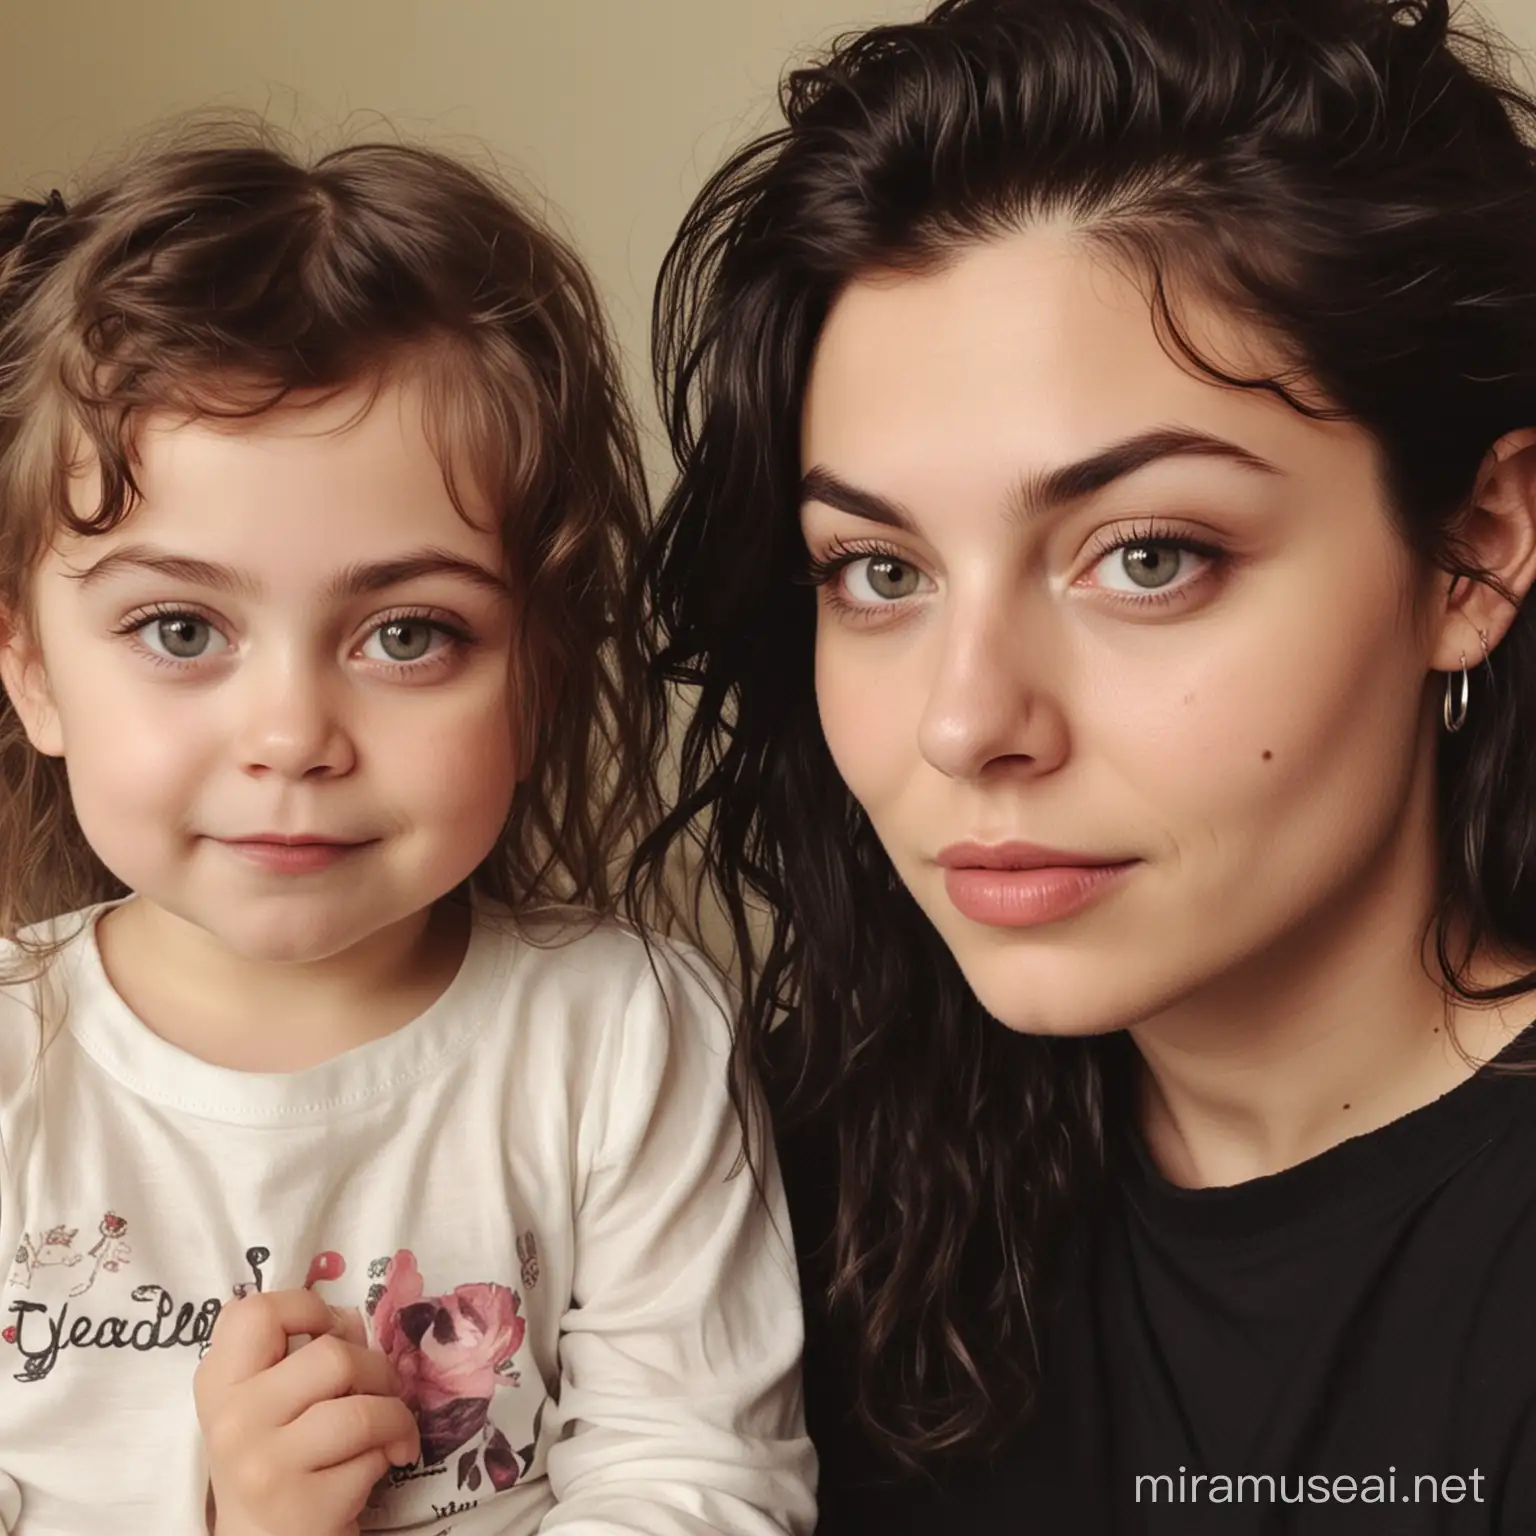 Dark CurlyHaired Girl with Mother Resembling Harry Styles and Frances Bean Cobain